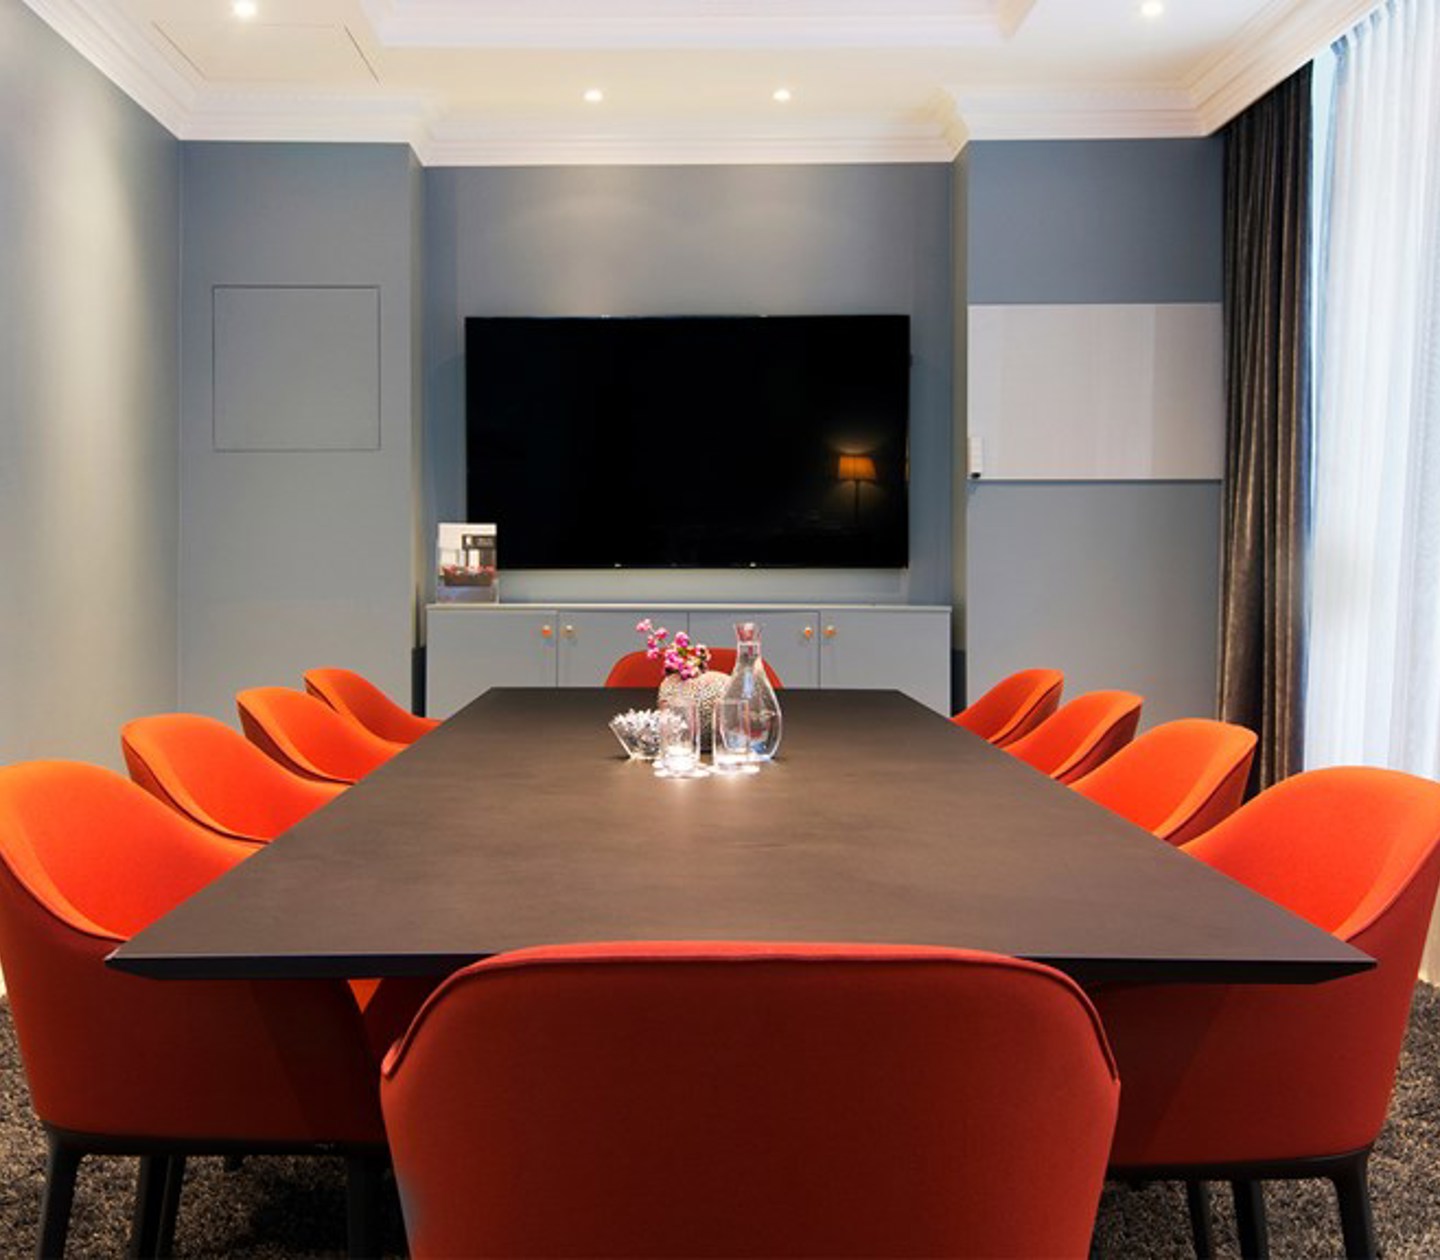 Conference room with orange chairs